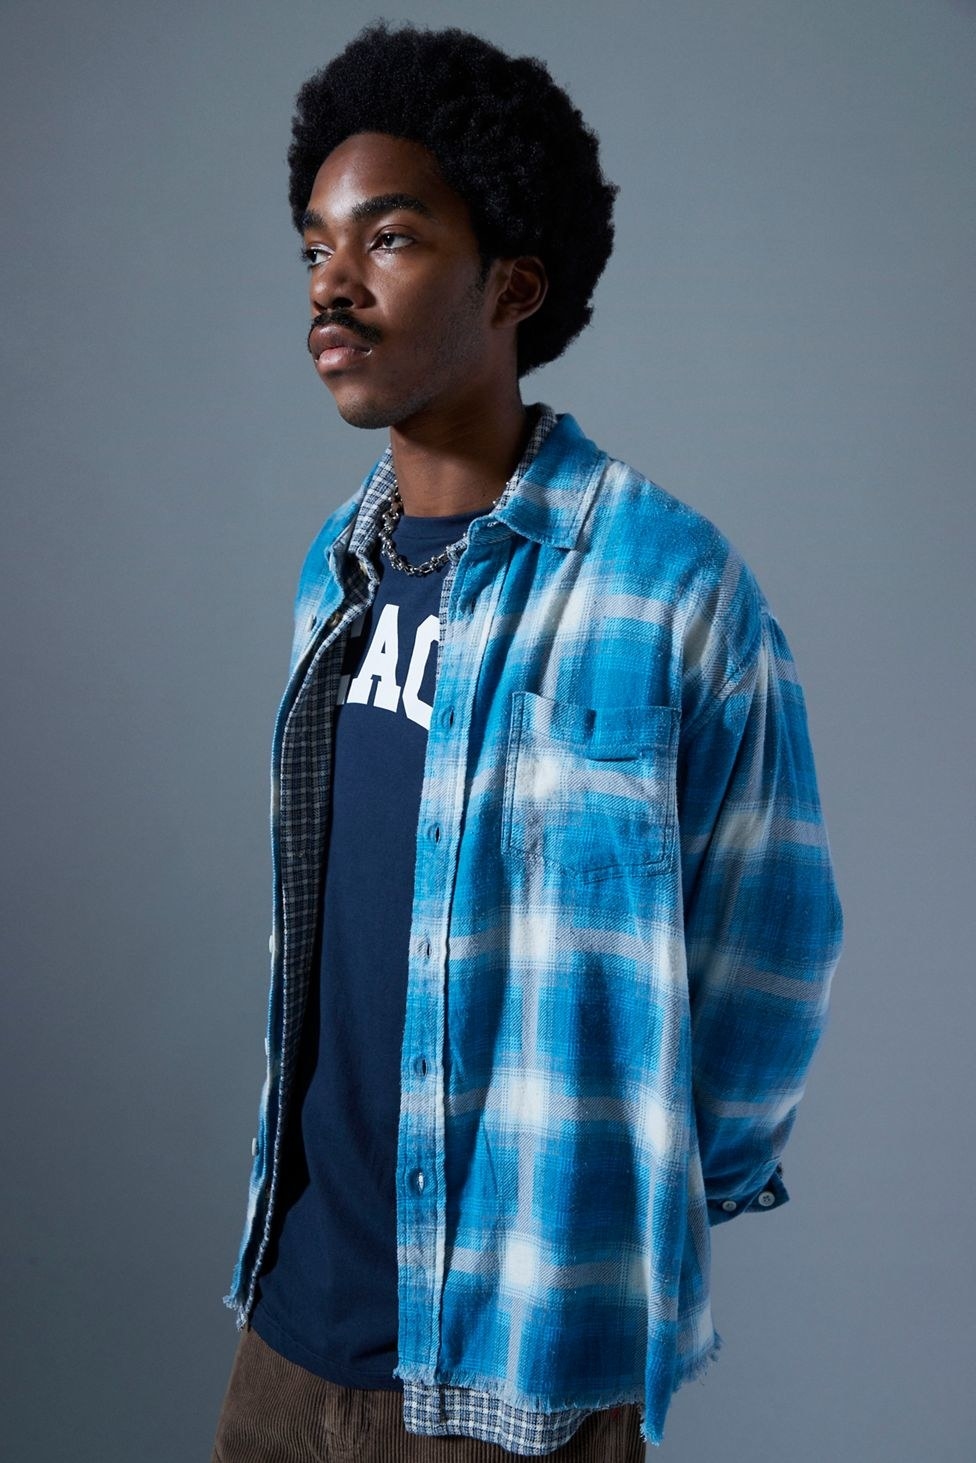 model in bright blue and white flannel button-up